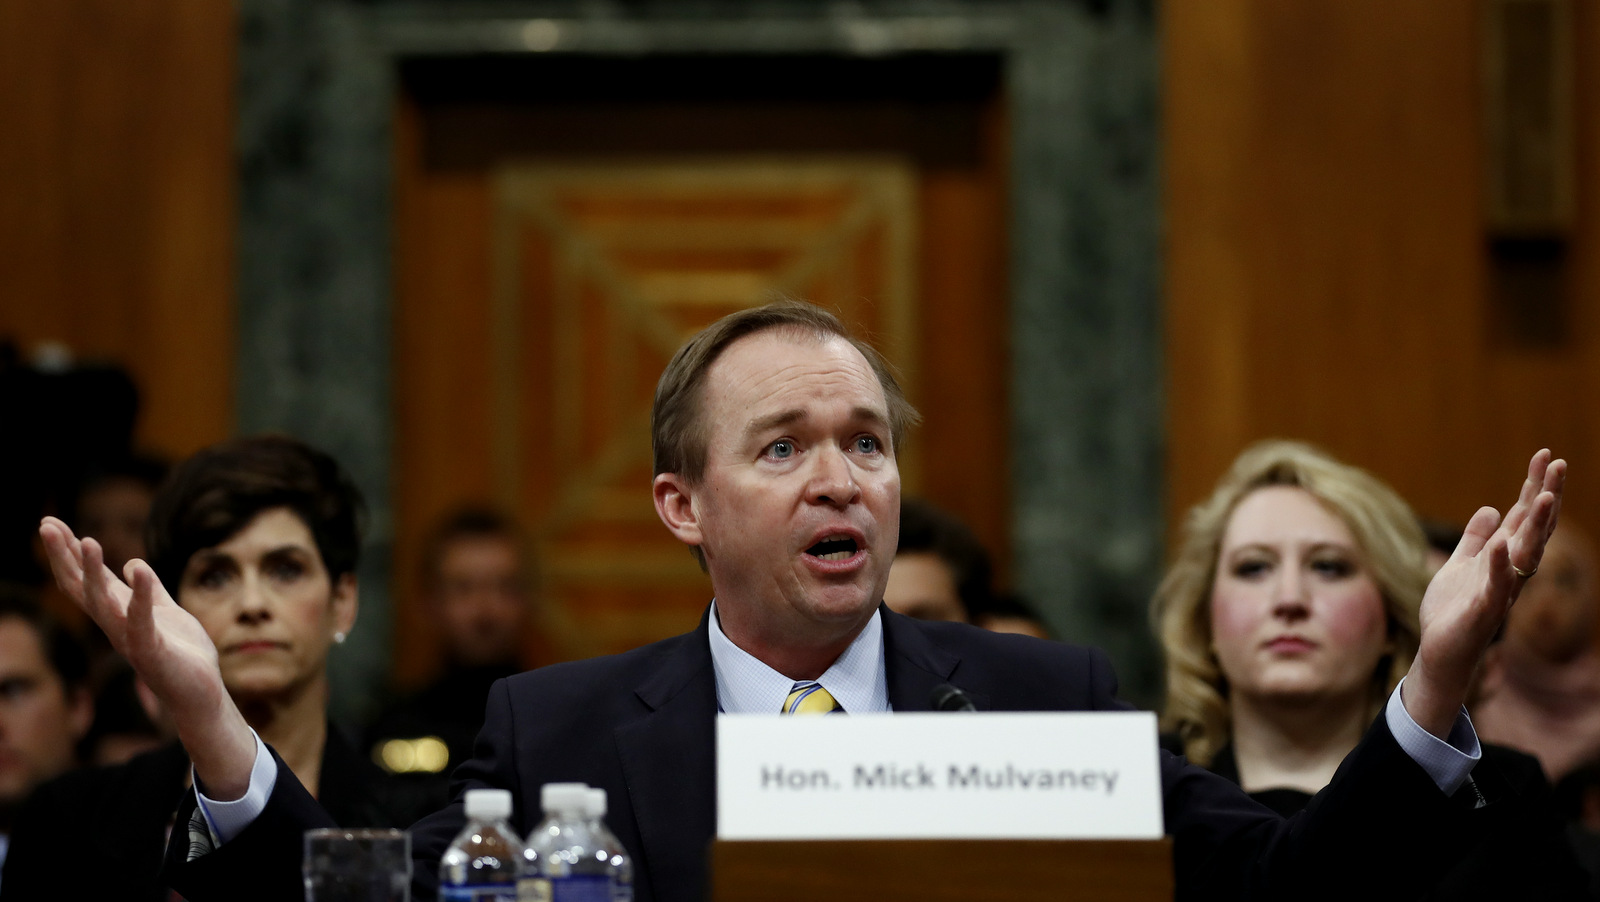 Trump's Budget Director-designate Rep. Mick Mulvaney, R-S.C., testifies on Capitol Hill in Washington, Jan. 24, 2017, at his confirmation hearing before the Senate Budget Committee. (AP/Carolyn Kaster)